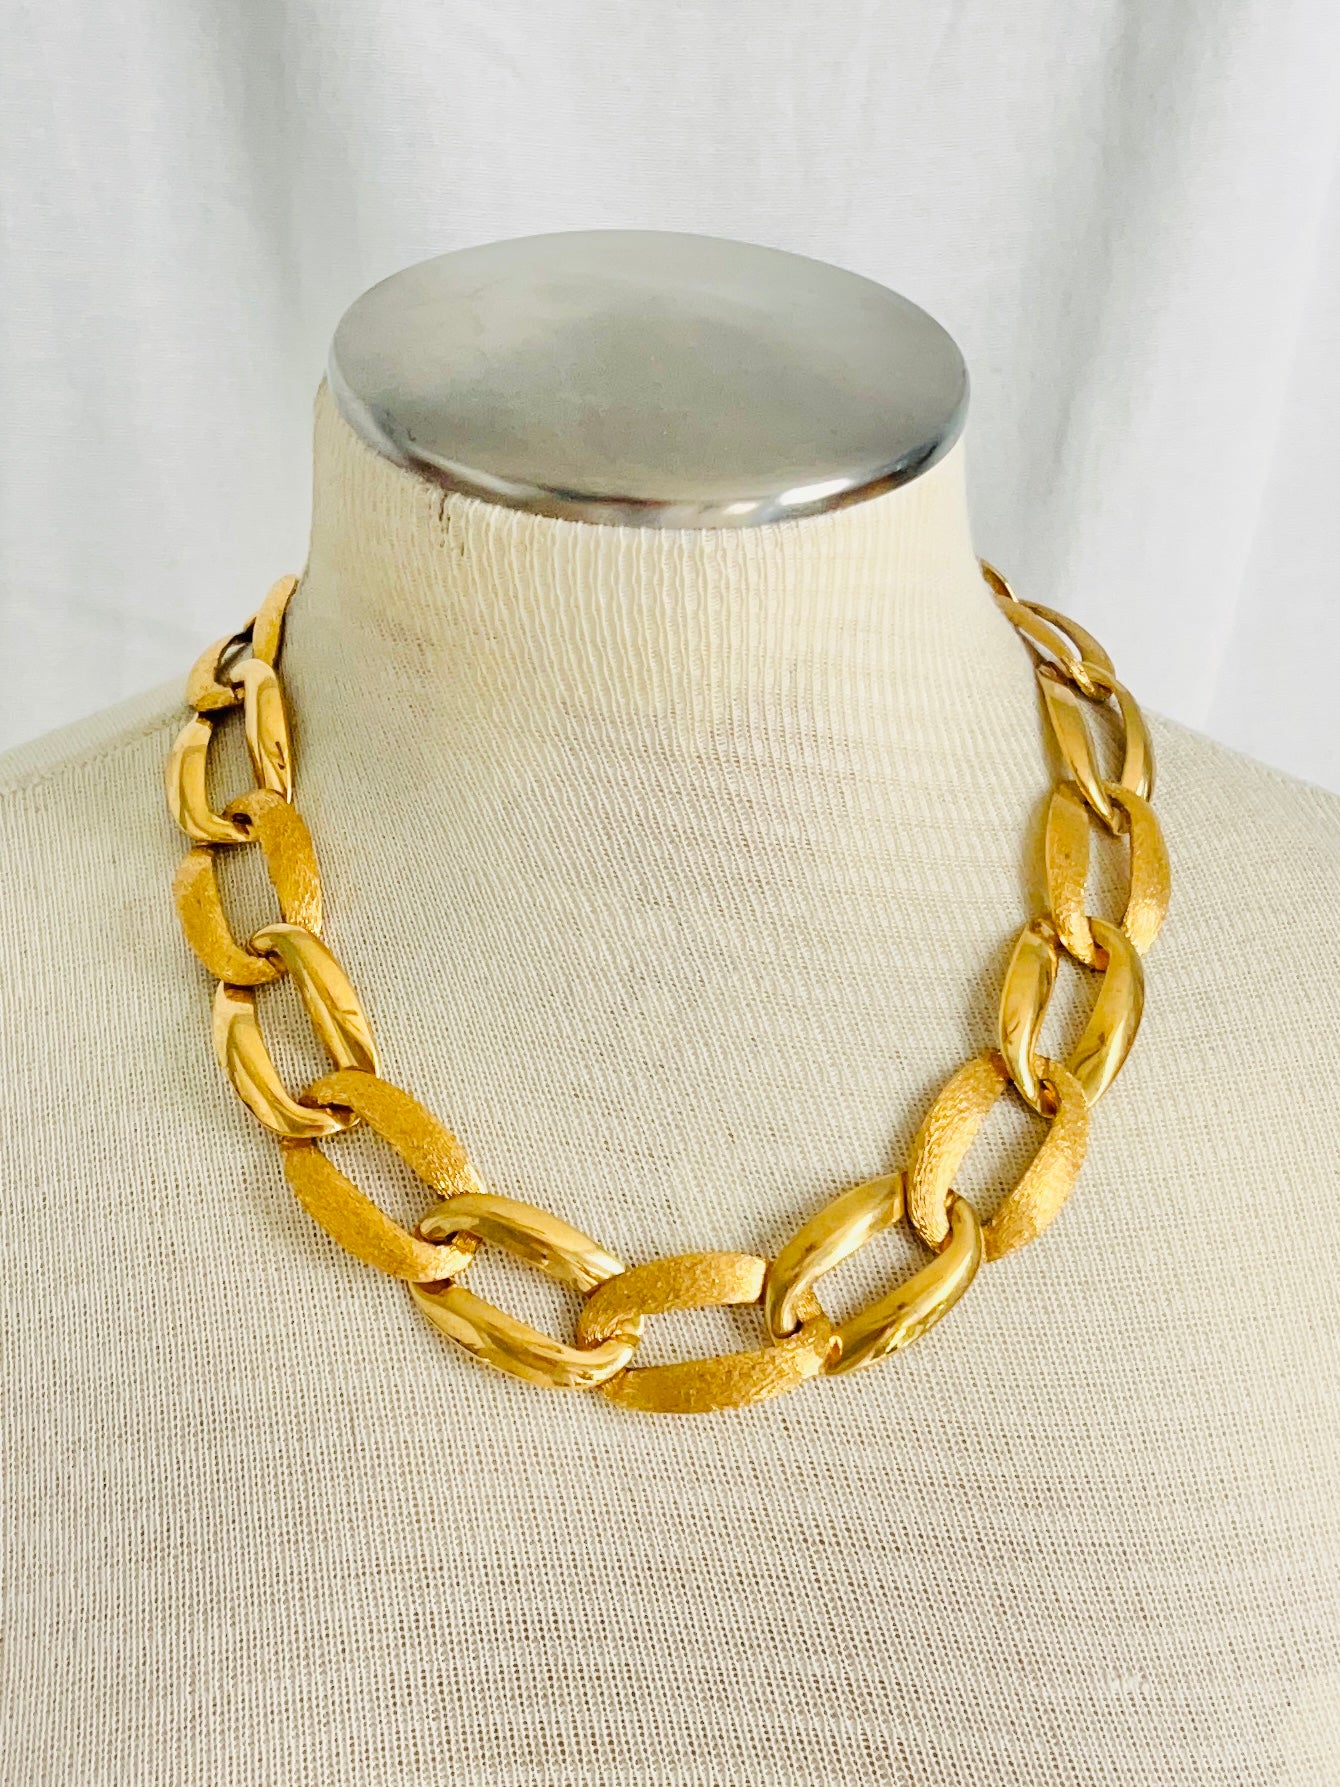 Vintage Napier Large Oval Shiny and Brushed Gold Chain Link Necklace